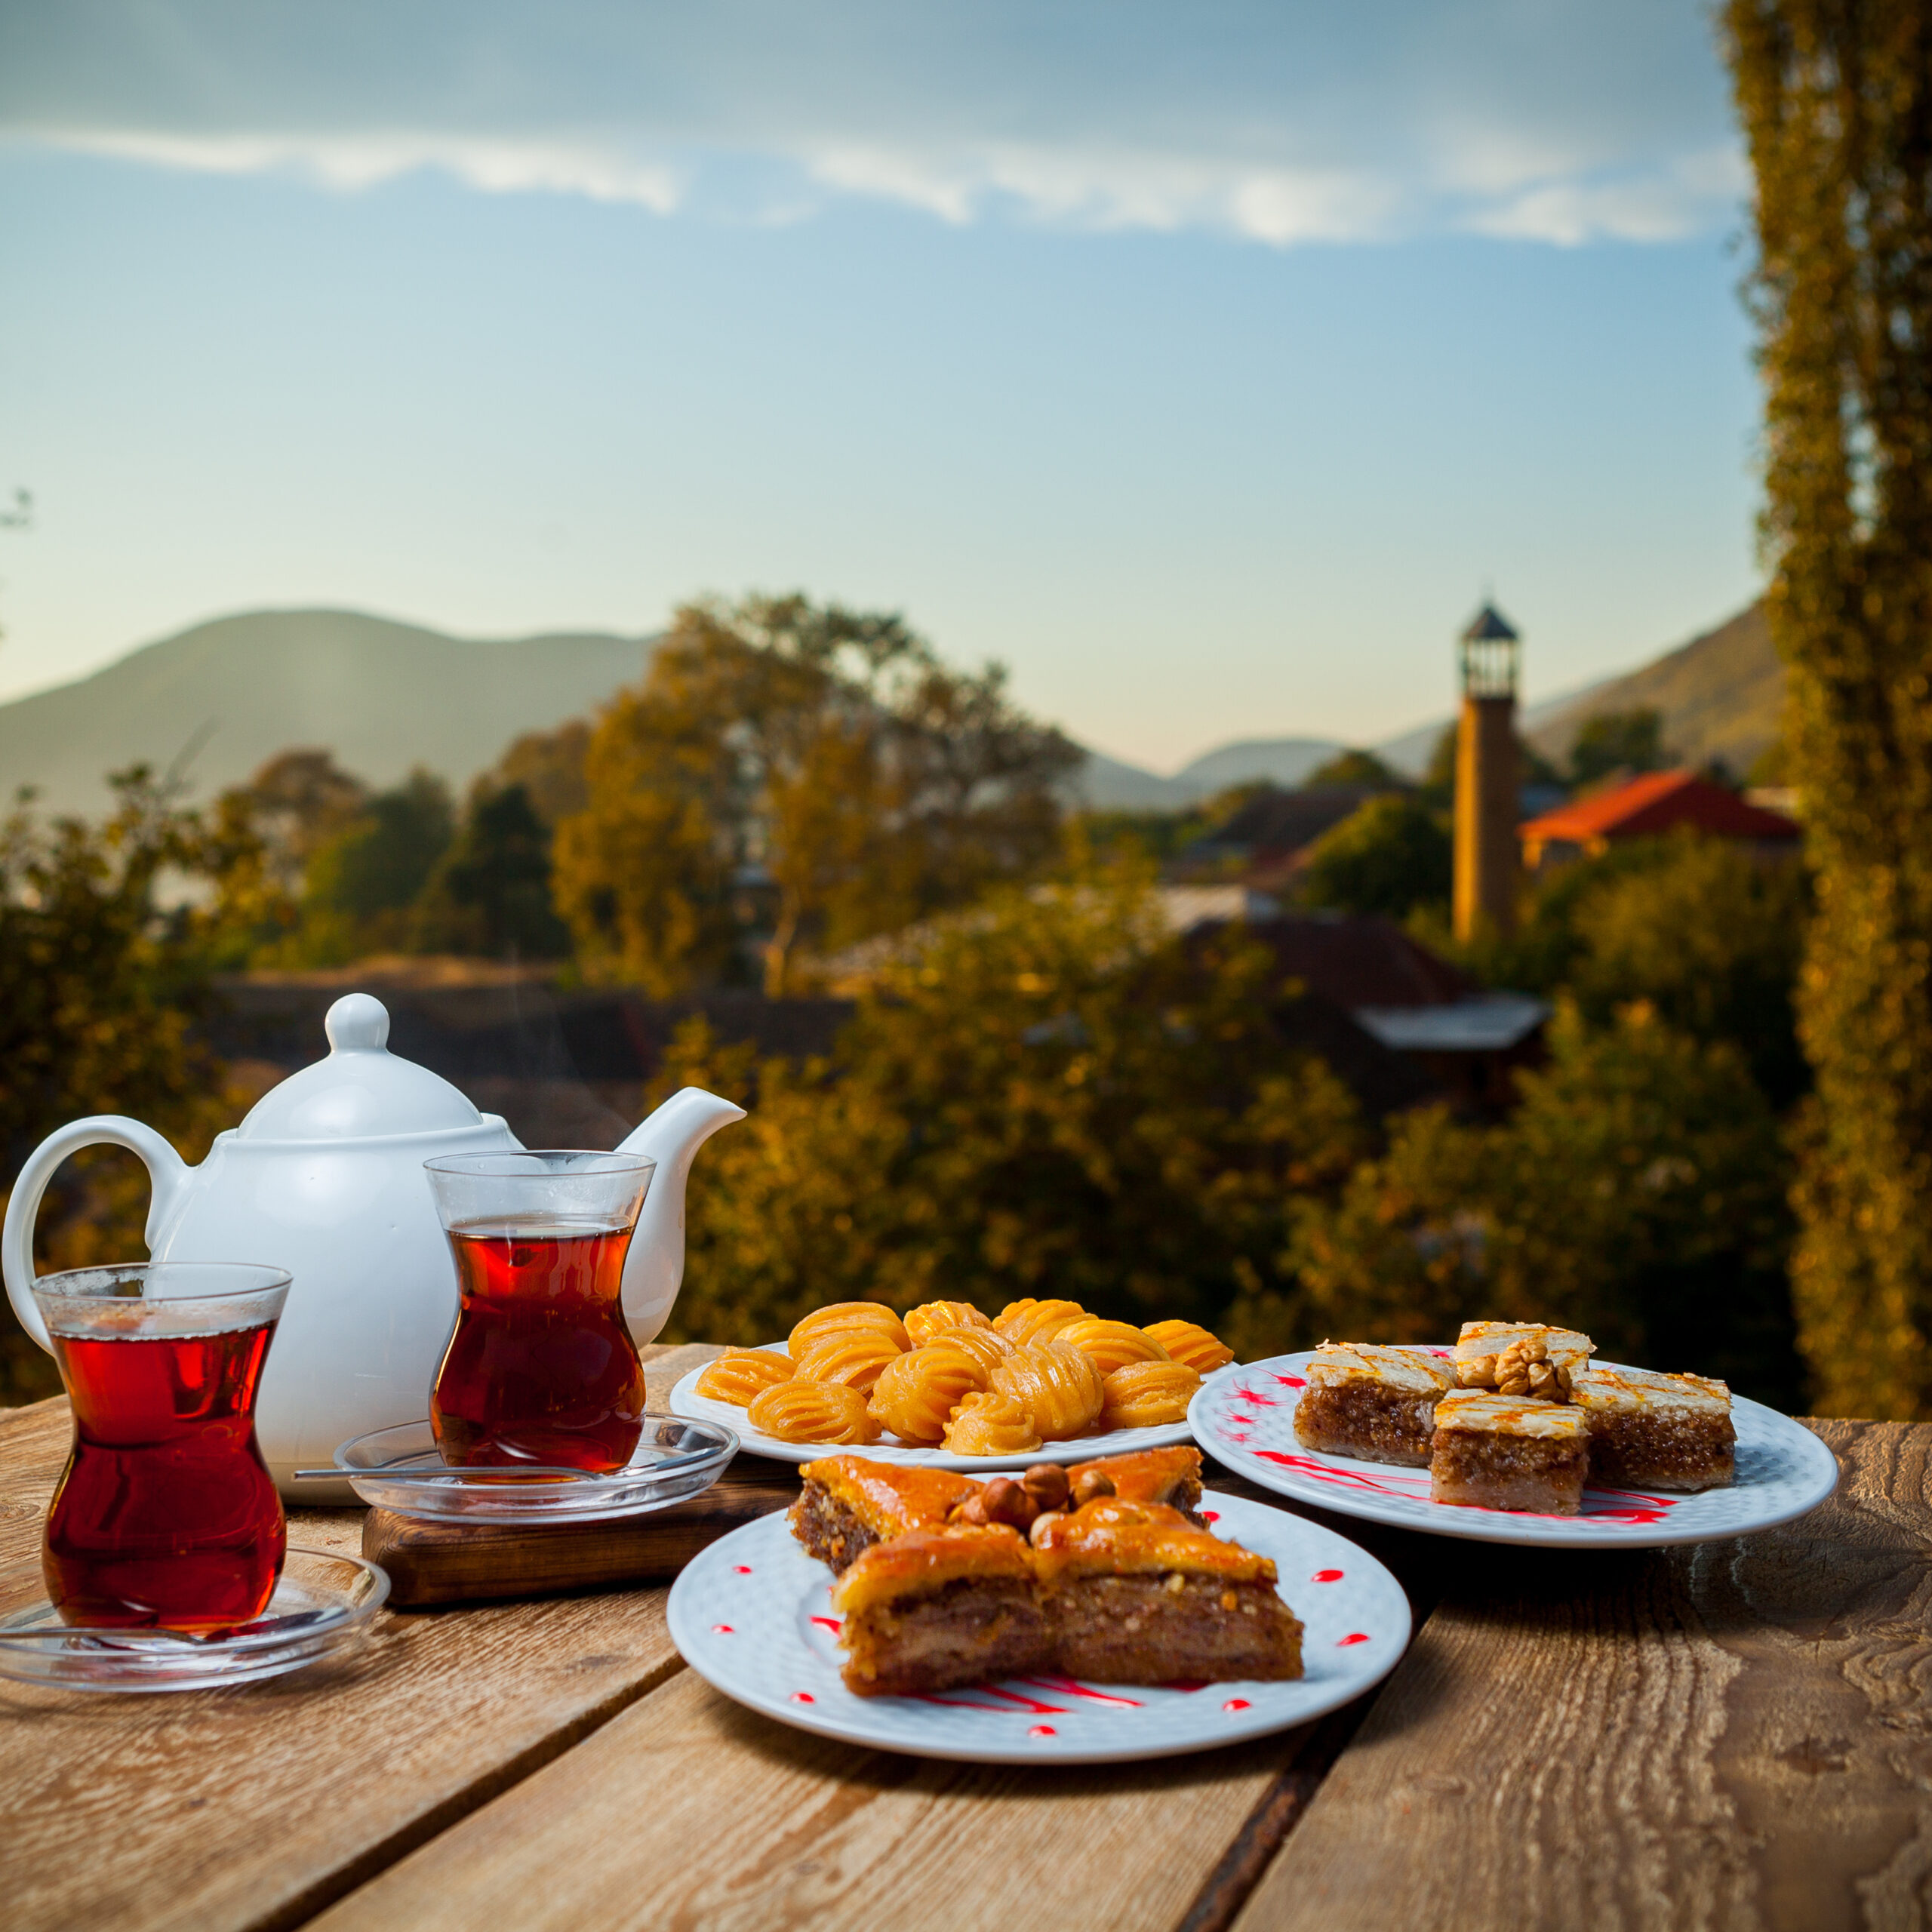 Some turkish desserts with glasses of tea and teapot on a table with village on background, side view.